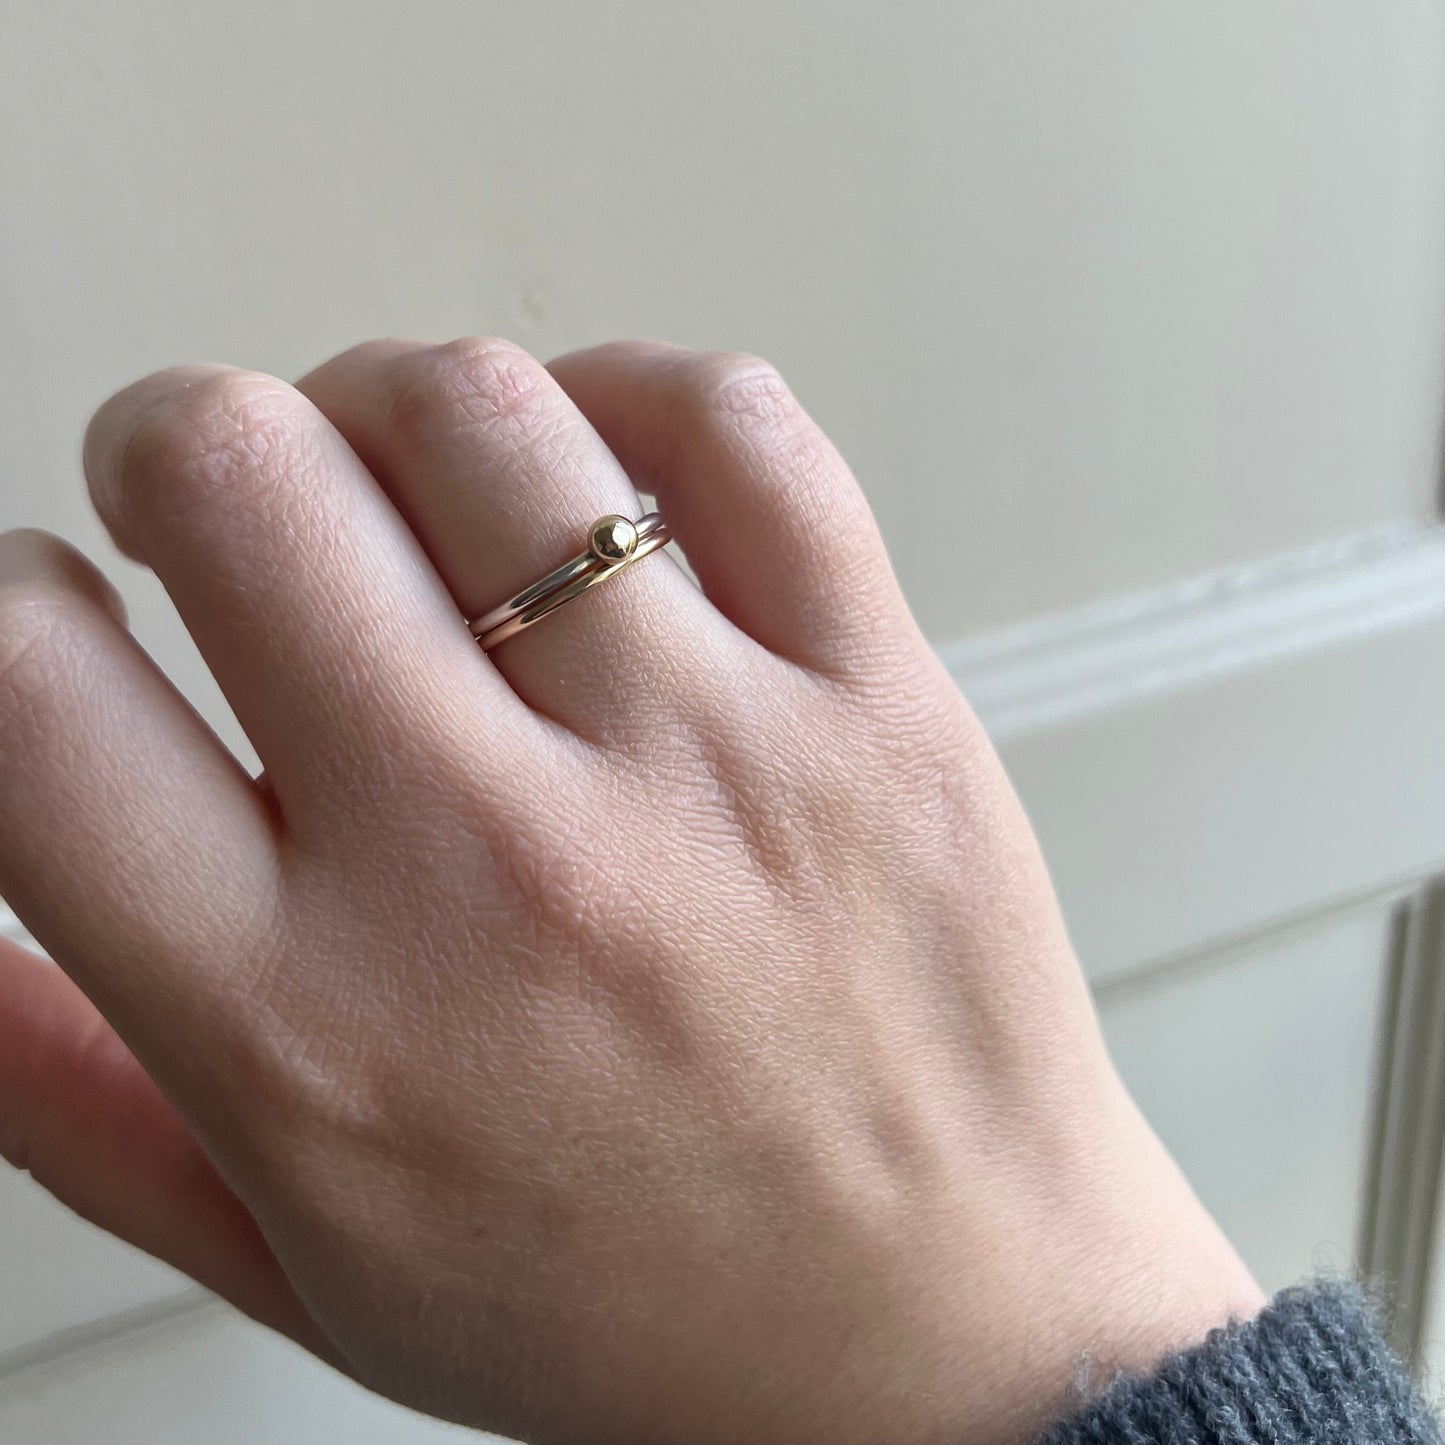 Silver and gold dot ring